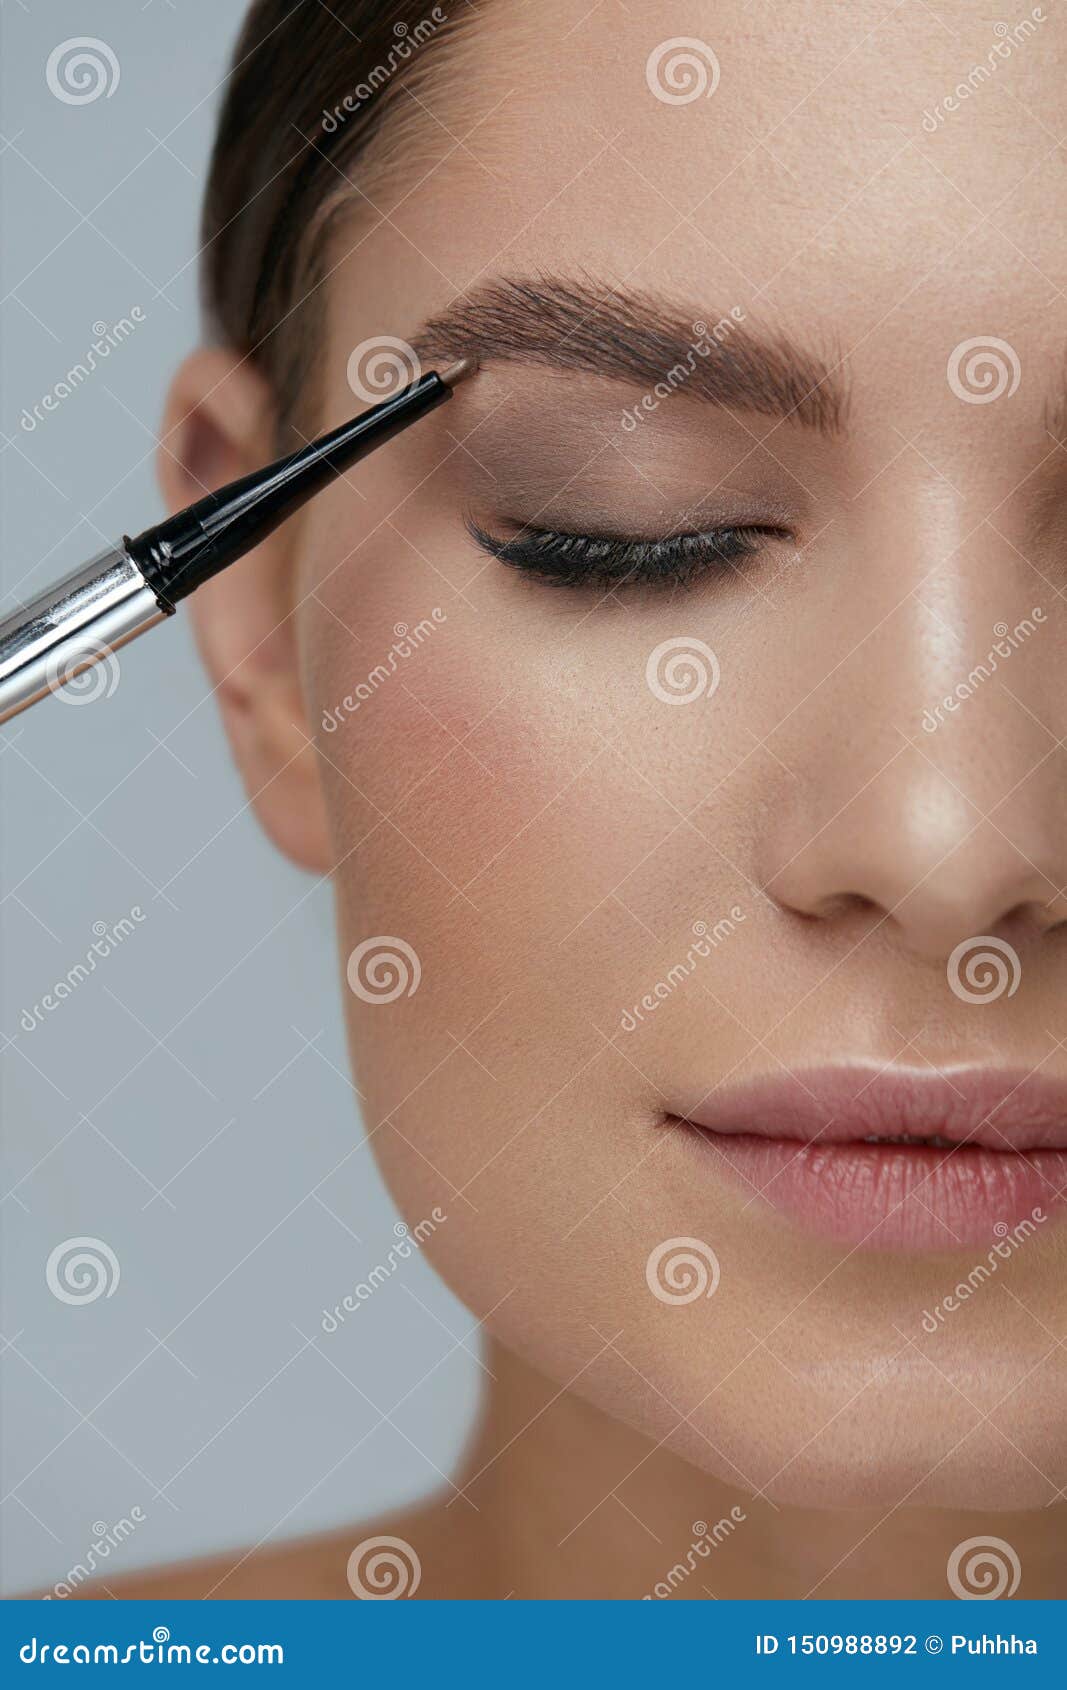 eyebrow makeup. beauty model shaping brows with brow pencil